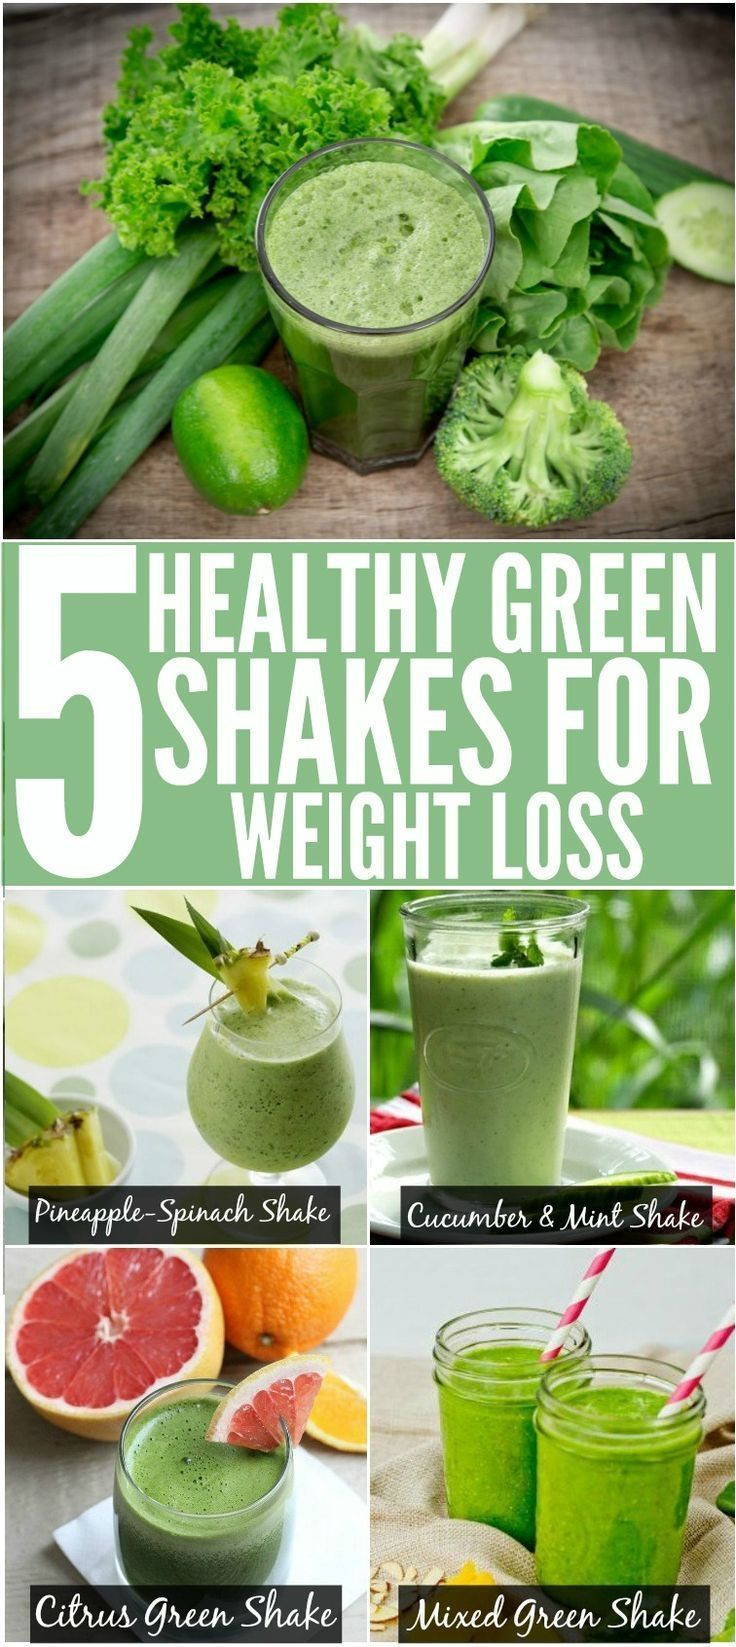 Best Protein Shake Recipes For Weight Loss
 108 best Protein Shakes for Weight Loss images on